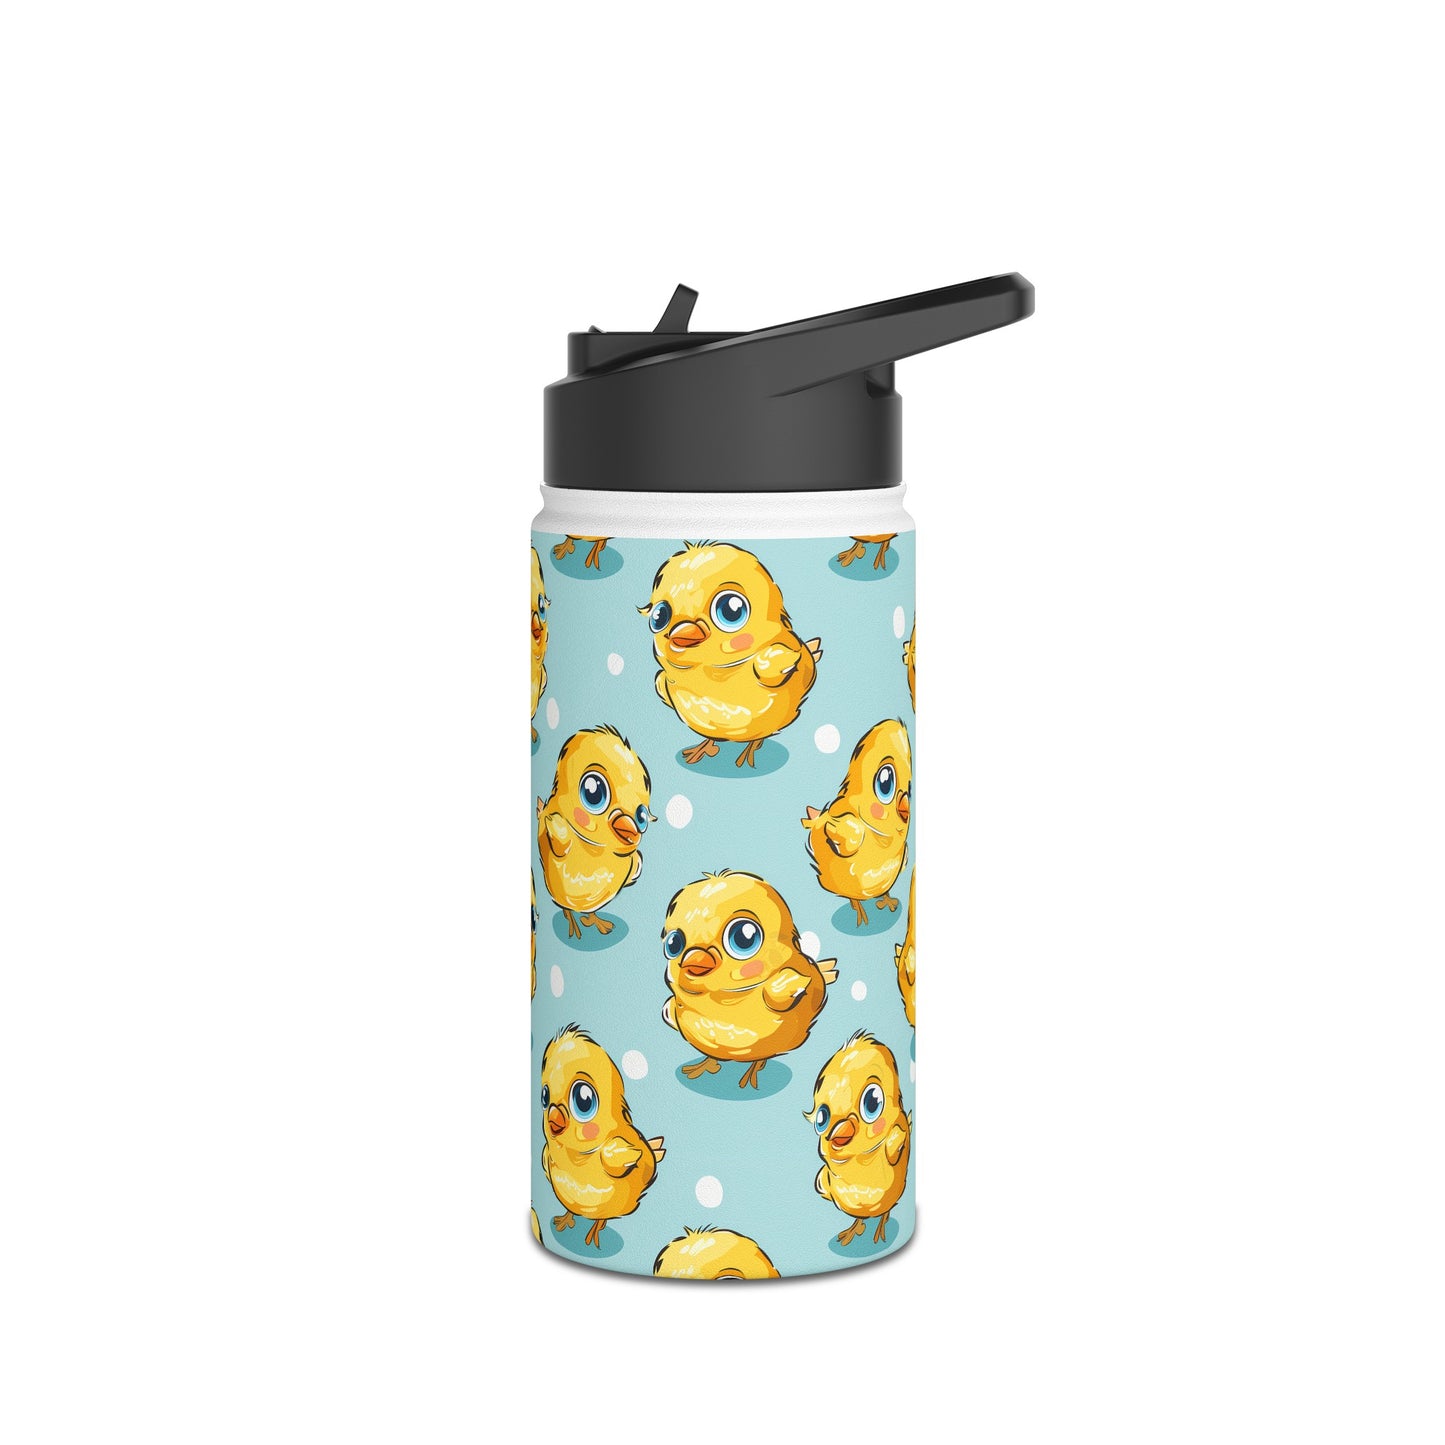 Insulated Water Bottle, 12oz, Cute Baby Chicks - Double Walled Stainless Steel Thermos, Keeps Drinks Hot or Cold